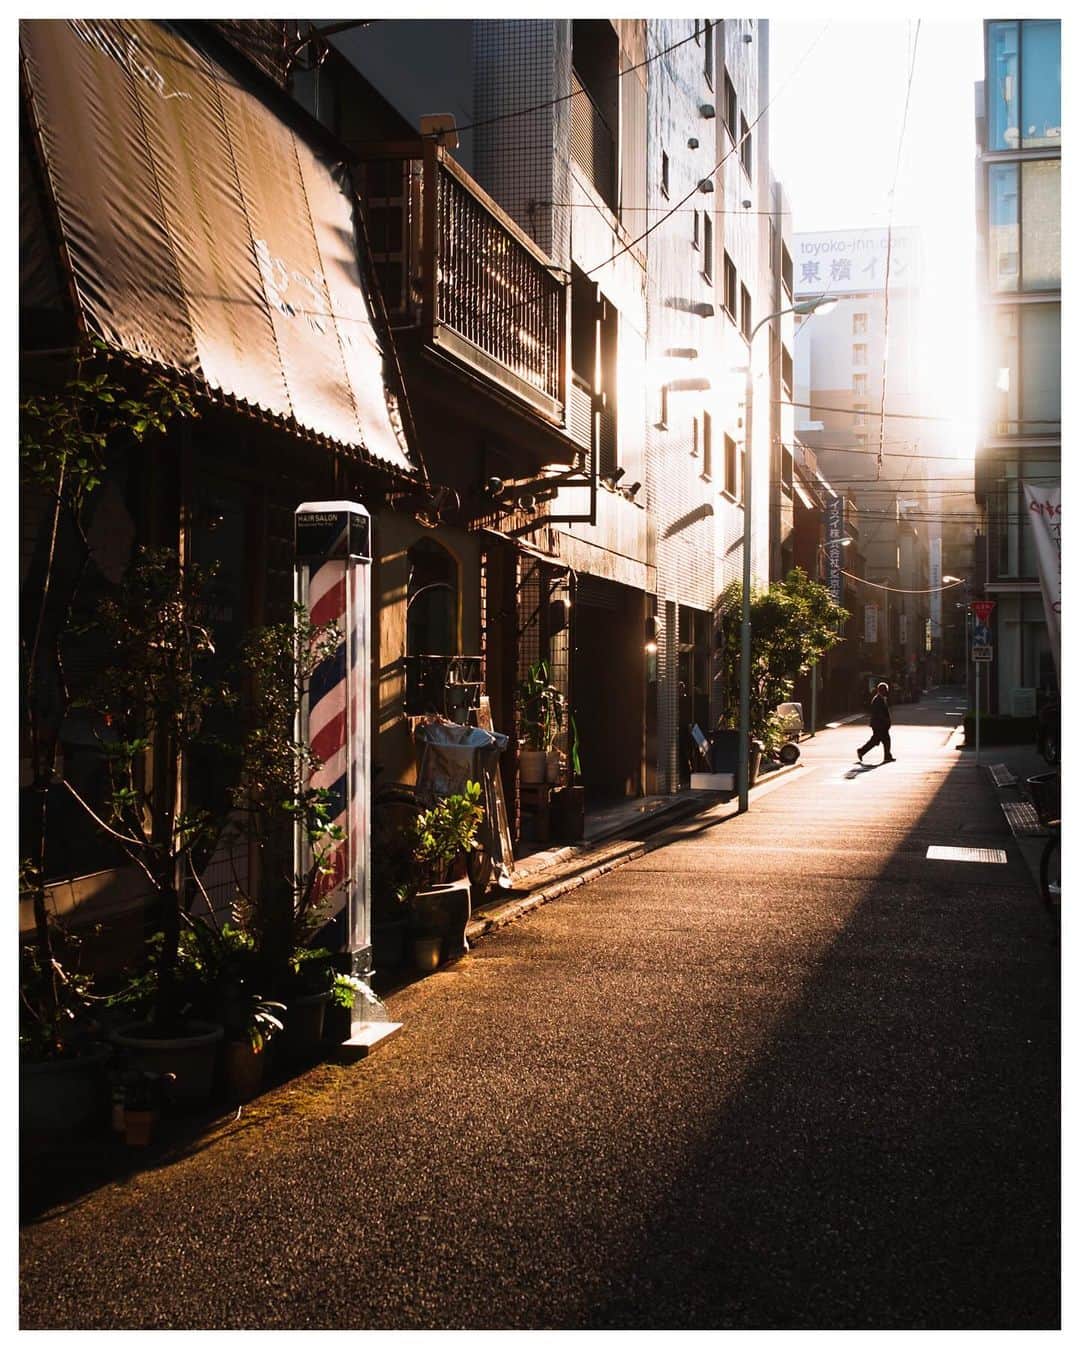 Takashi Yasuiのインスタグラム：「Tokyo 💈 November 2023  📕My photo book - worldwide shipping daily - 🖥 Lightroom presets ▶▶Link in bio  #USETSU #USETSUpresets #TakashiYasui #SPiCollective #filmic_streets #ASPfeatures #photocinematica #STREETGRAMMERS #street_storytelling #bcncollective #ifyouleave #sublimestreet #streetfinder #timeless_streets #MadeWithLightroom #worldviewmag #hellofrom #reco_ig」